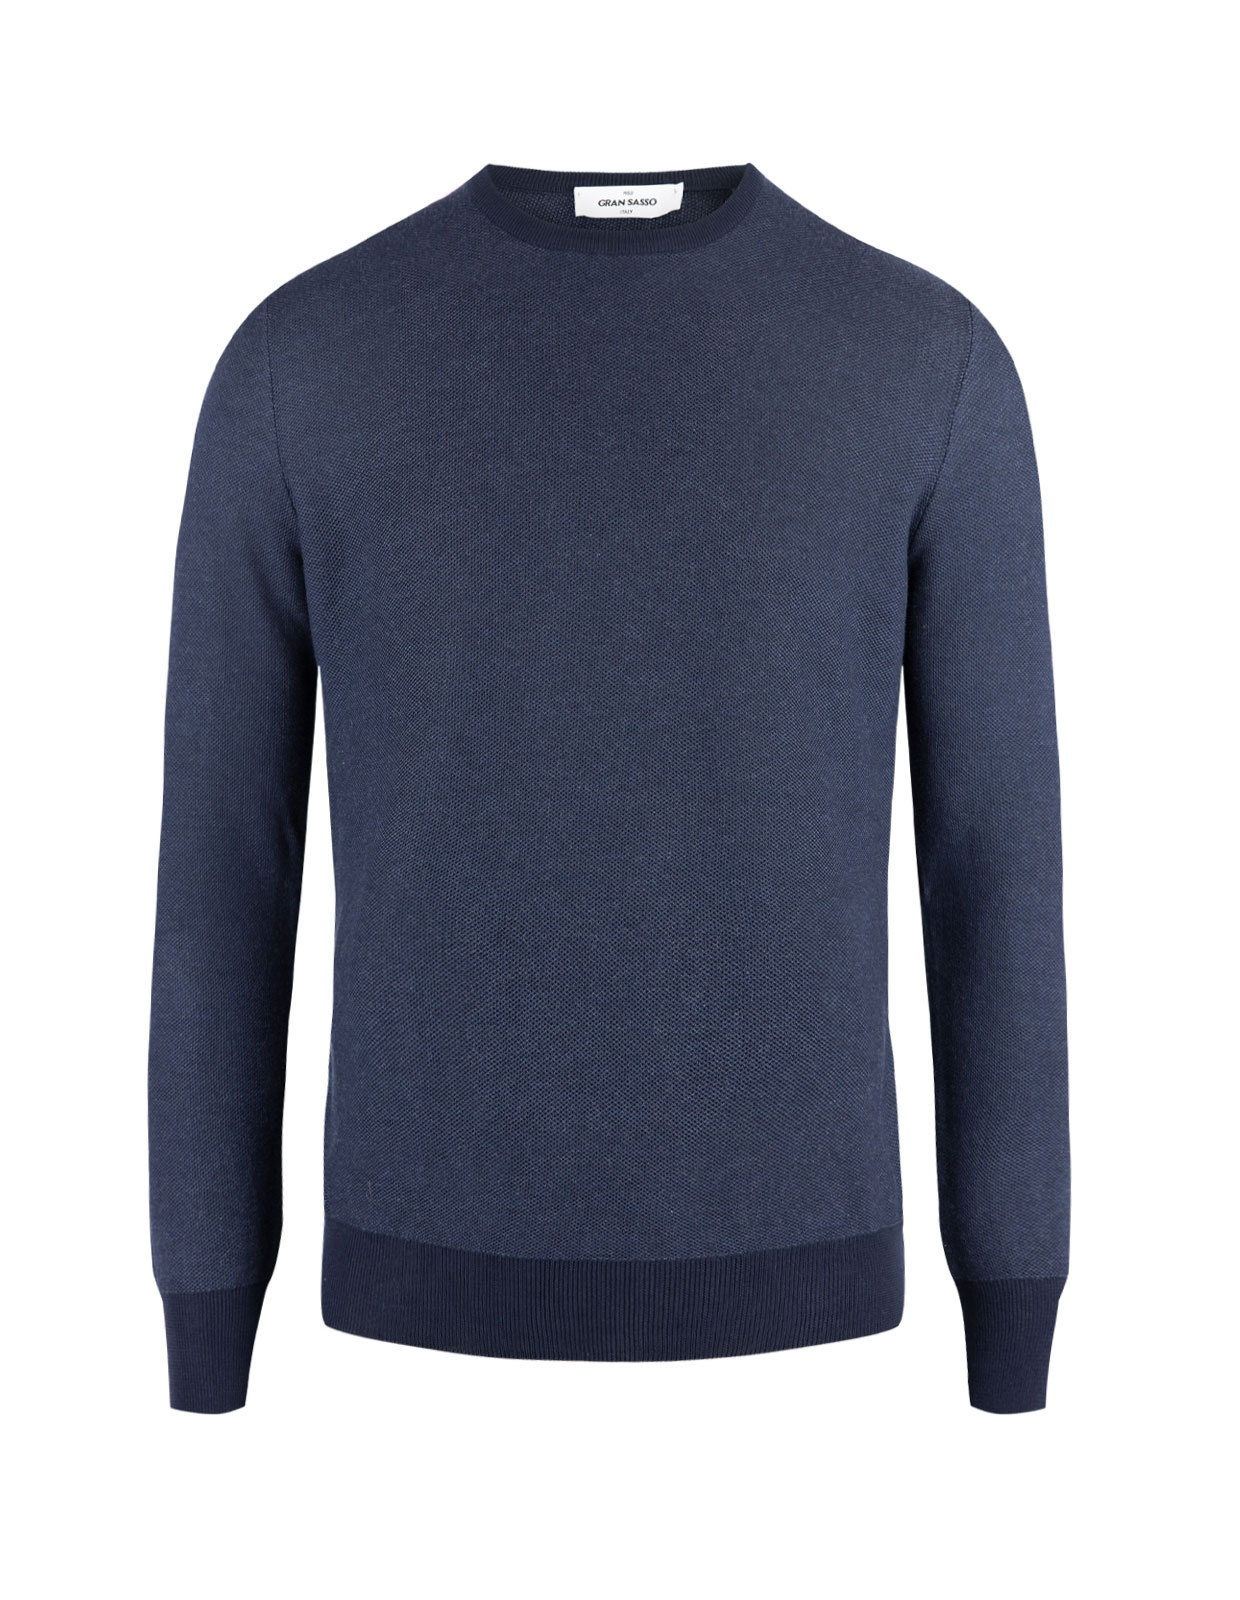 Contrast Crew Neck Knitted Cotton Navy